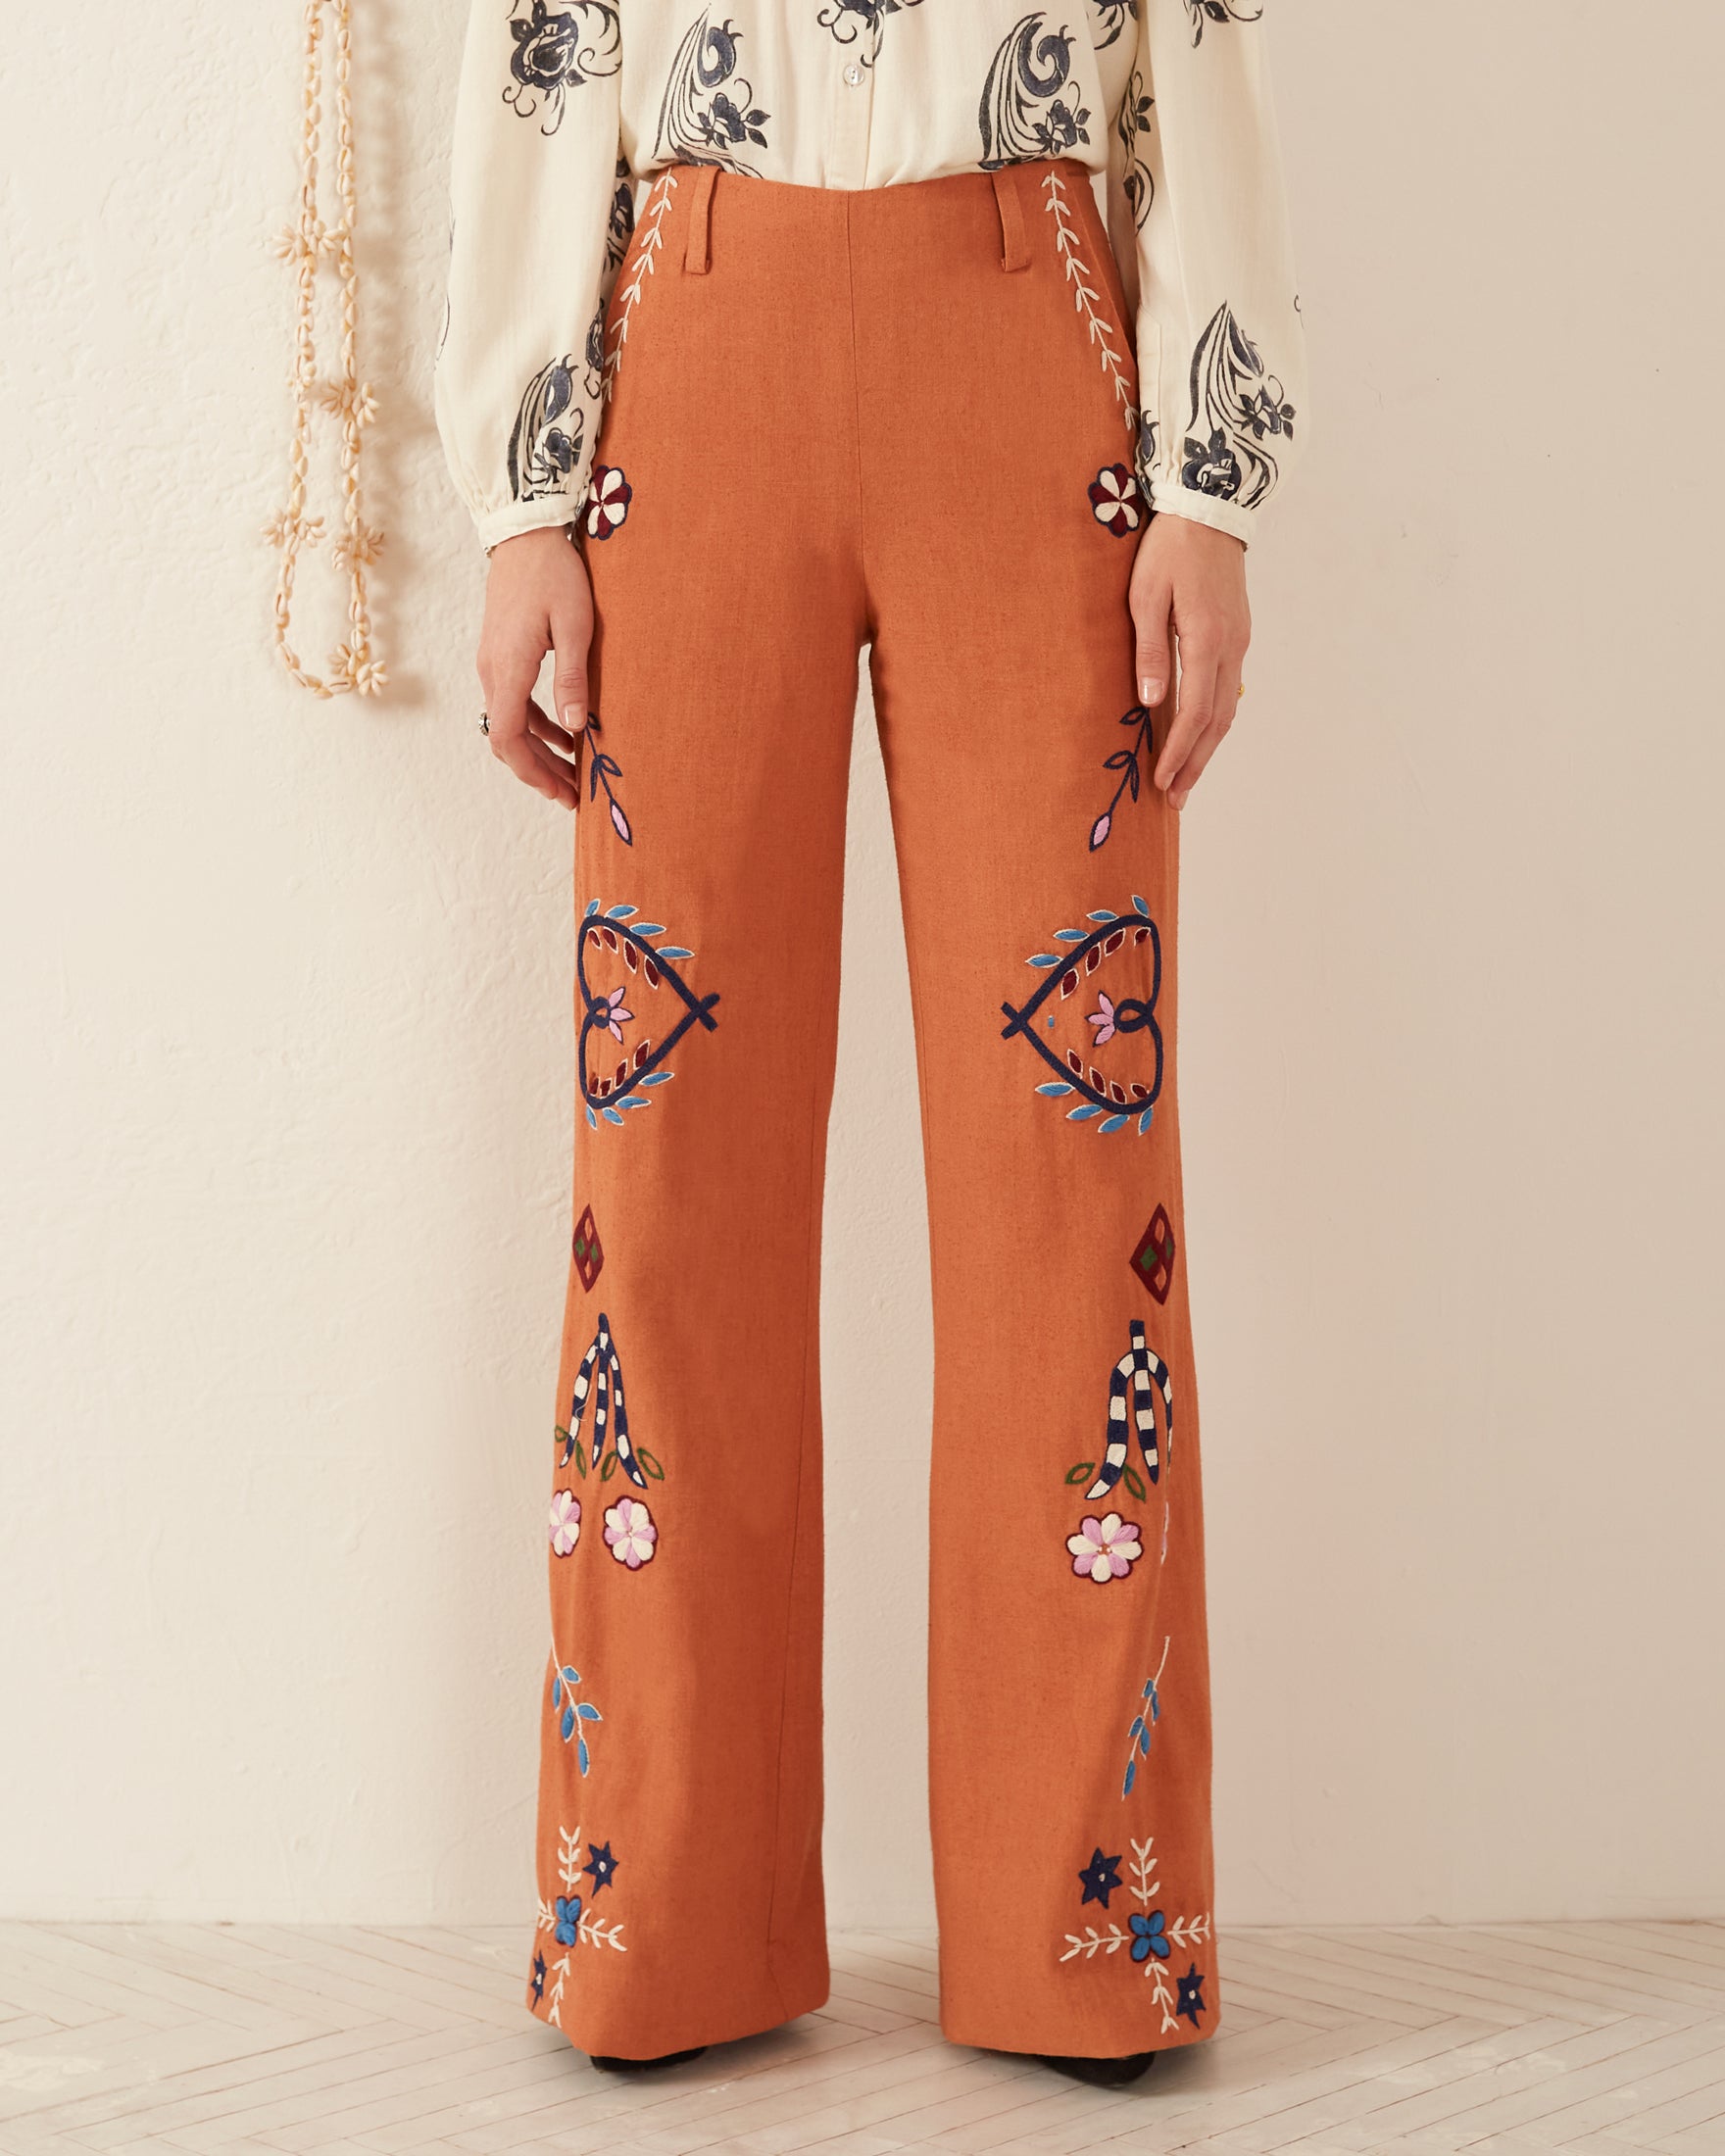 Women's Embroidered Floral Pants Graphic Sweatpants, French Terry |  Shop.PBS.org